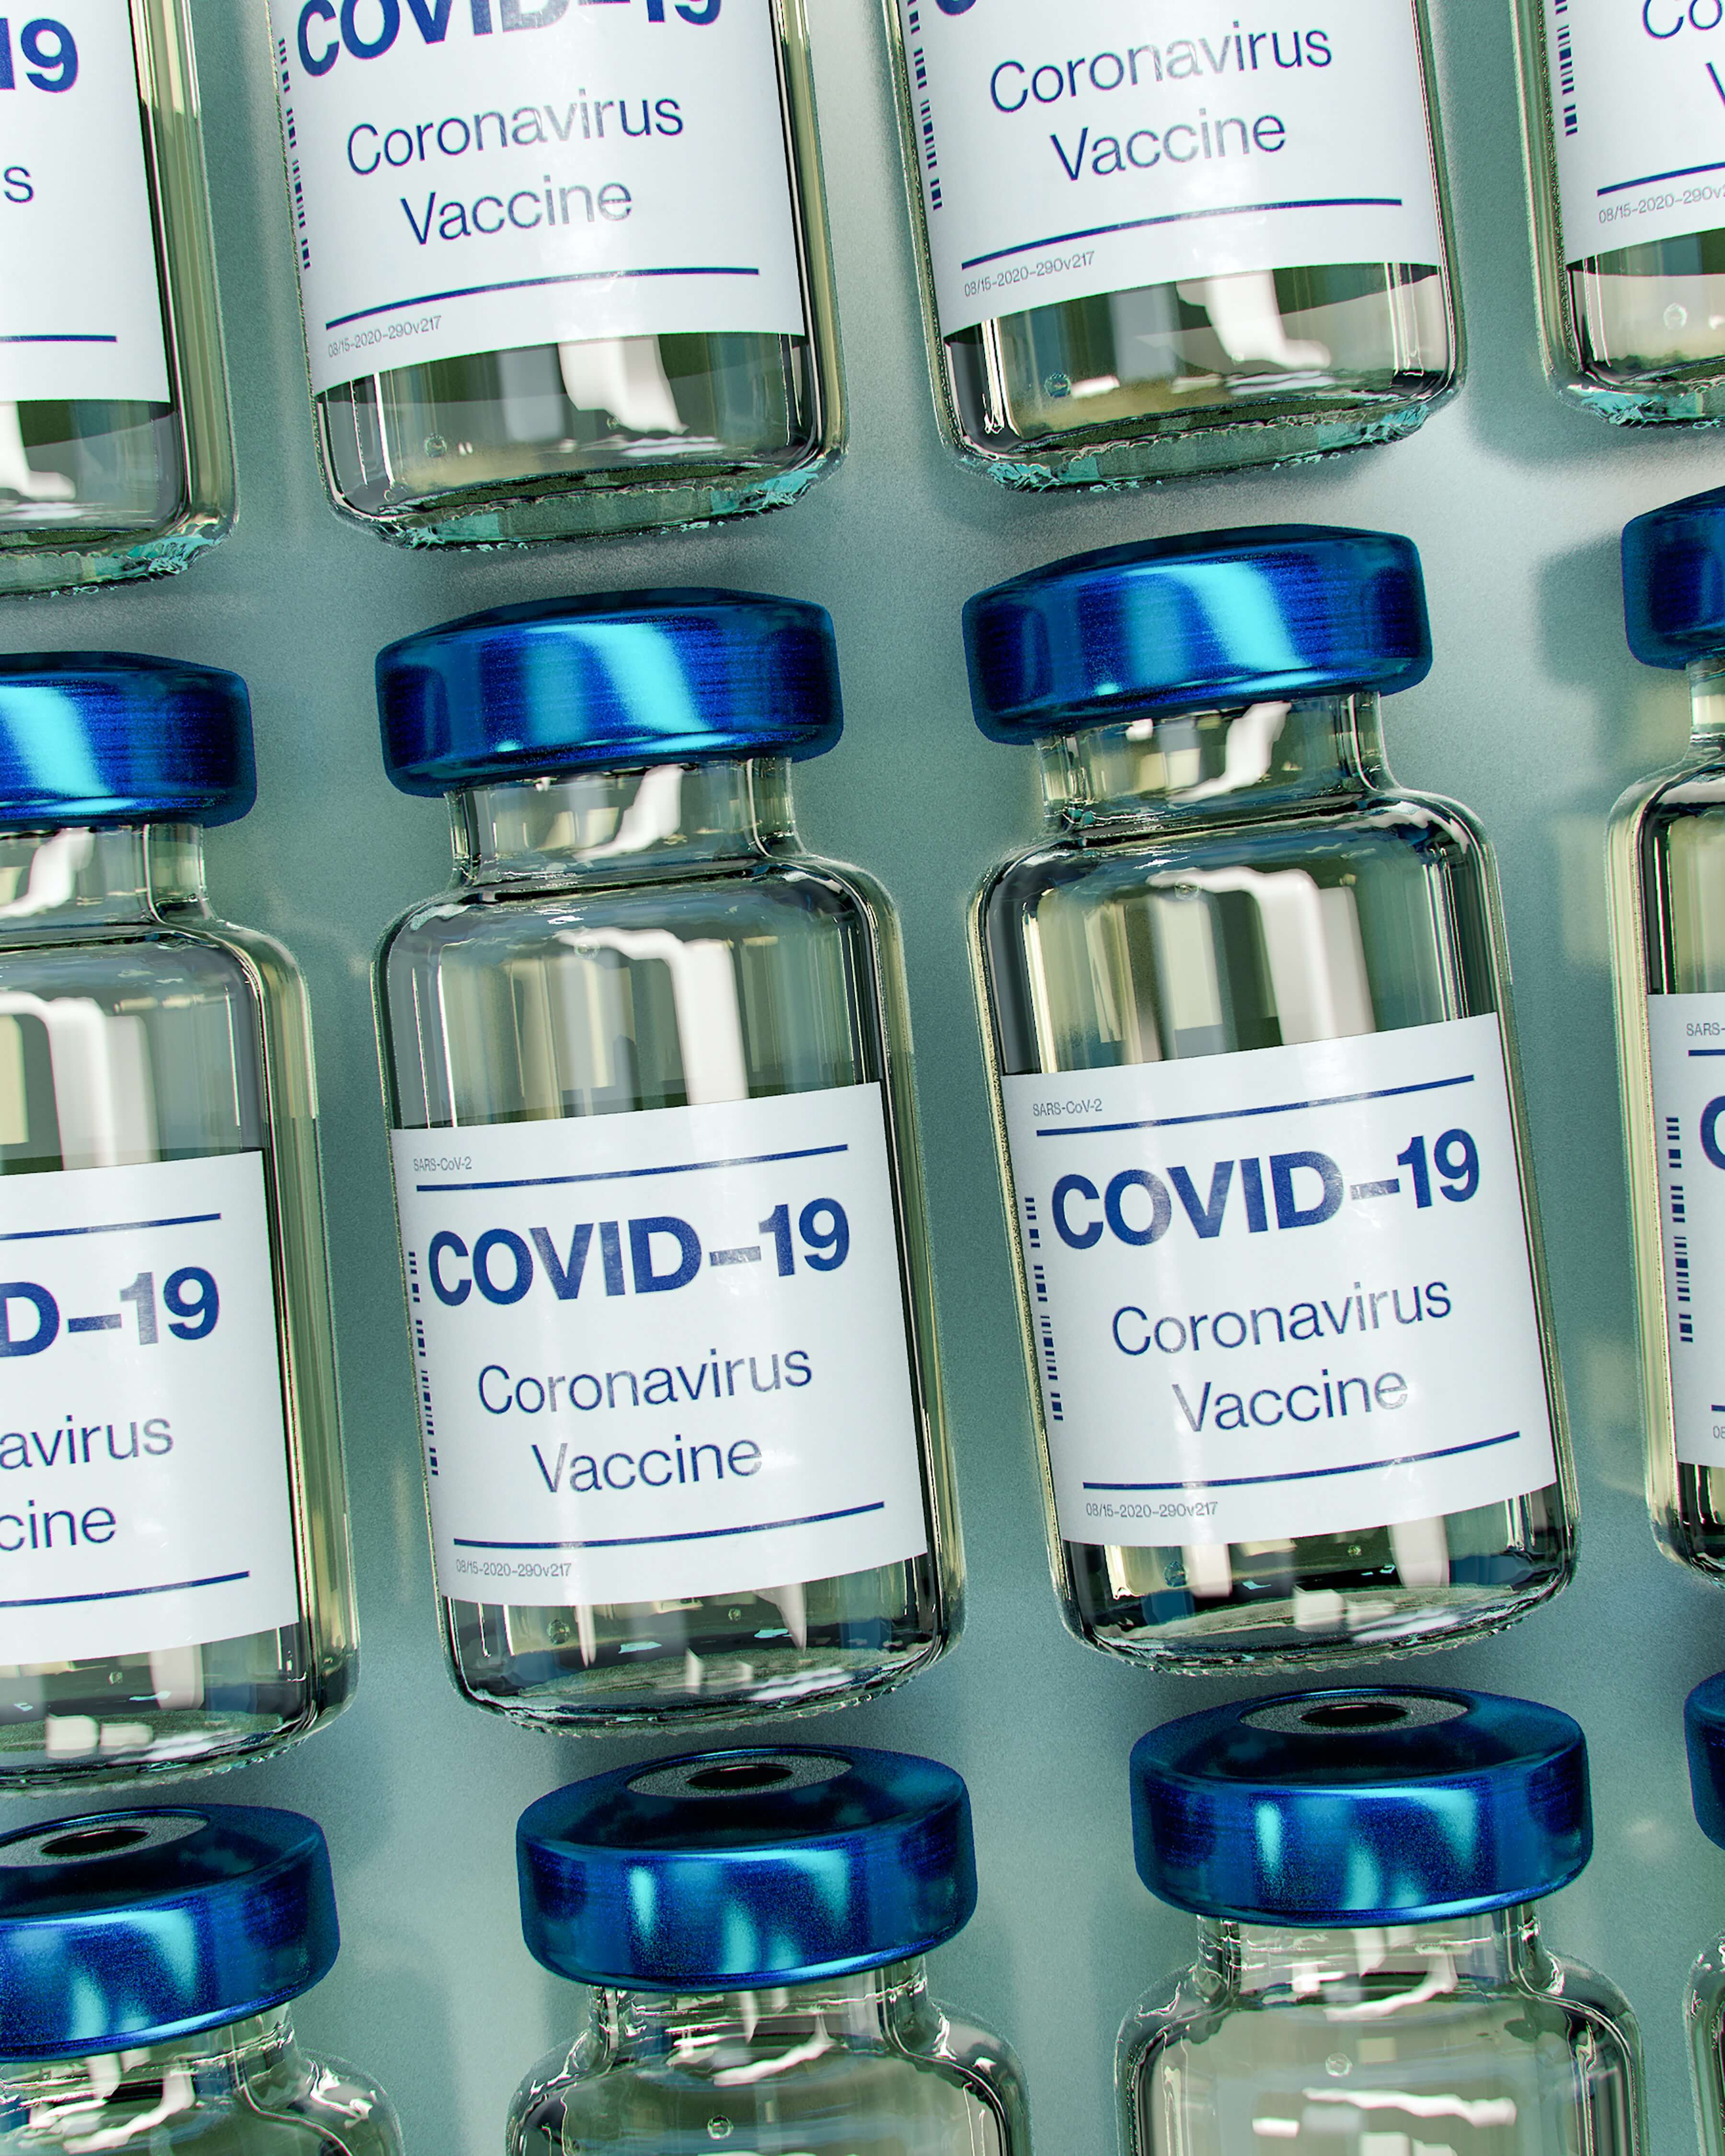 Ethics approvals were fast-tracked during the COVID-19 pandemic.